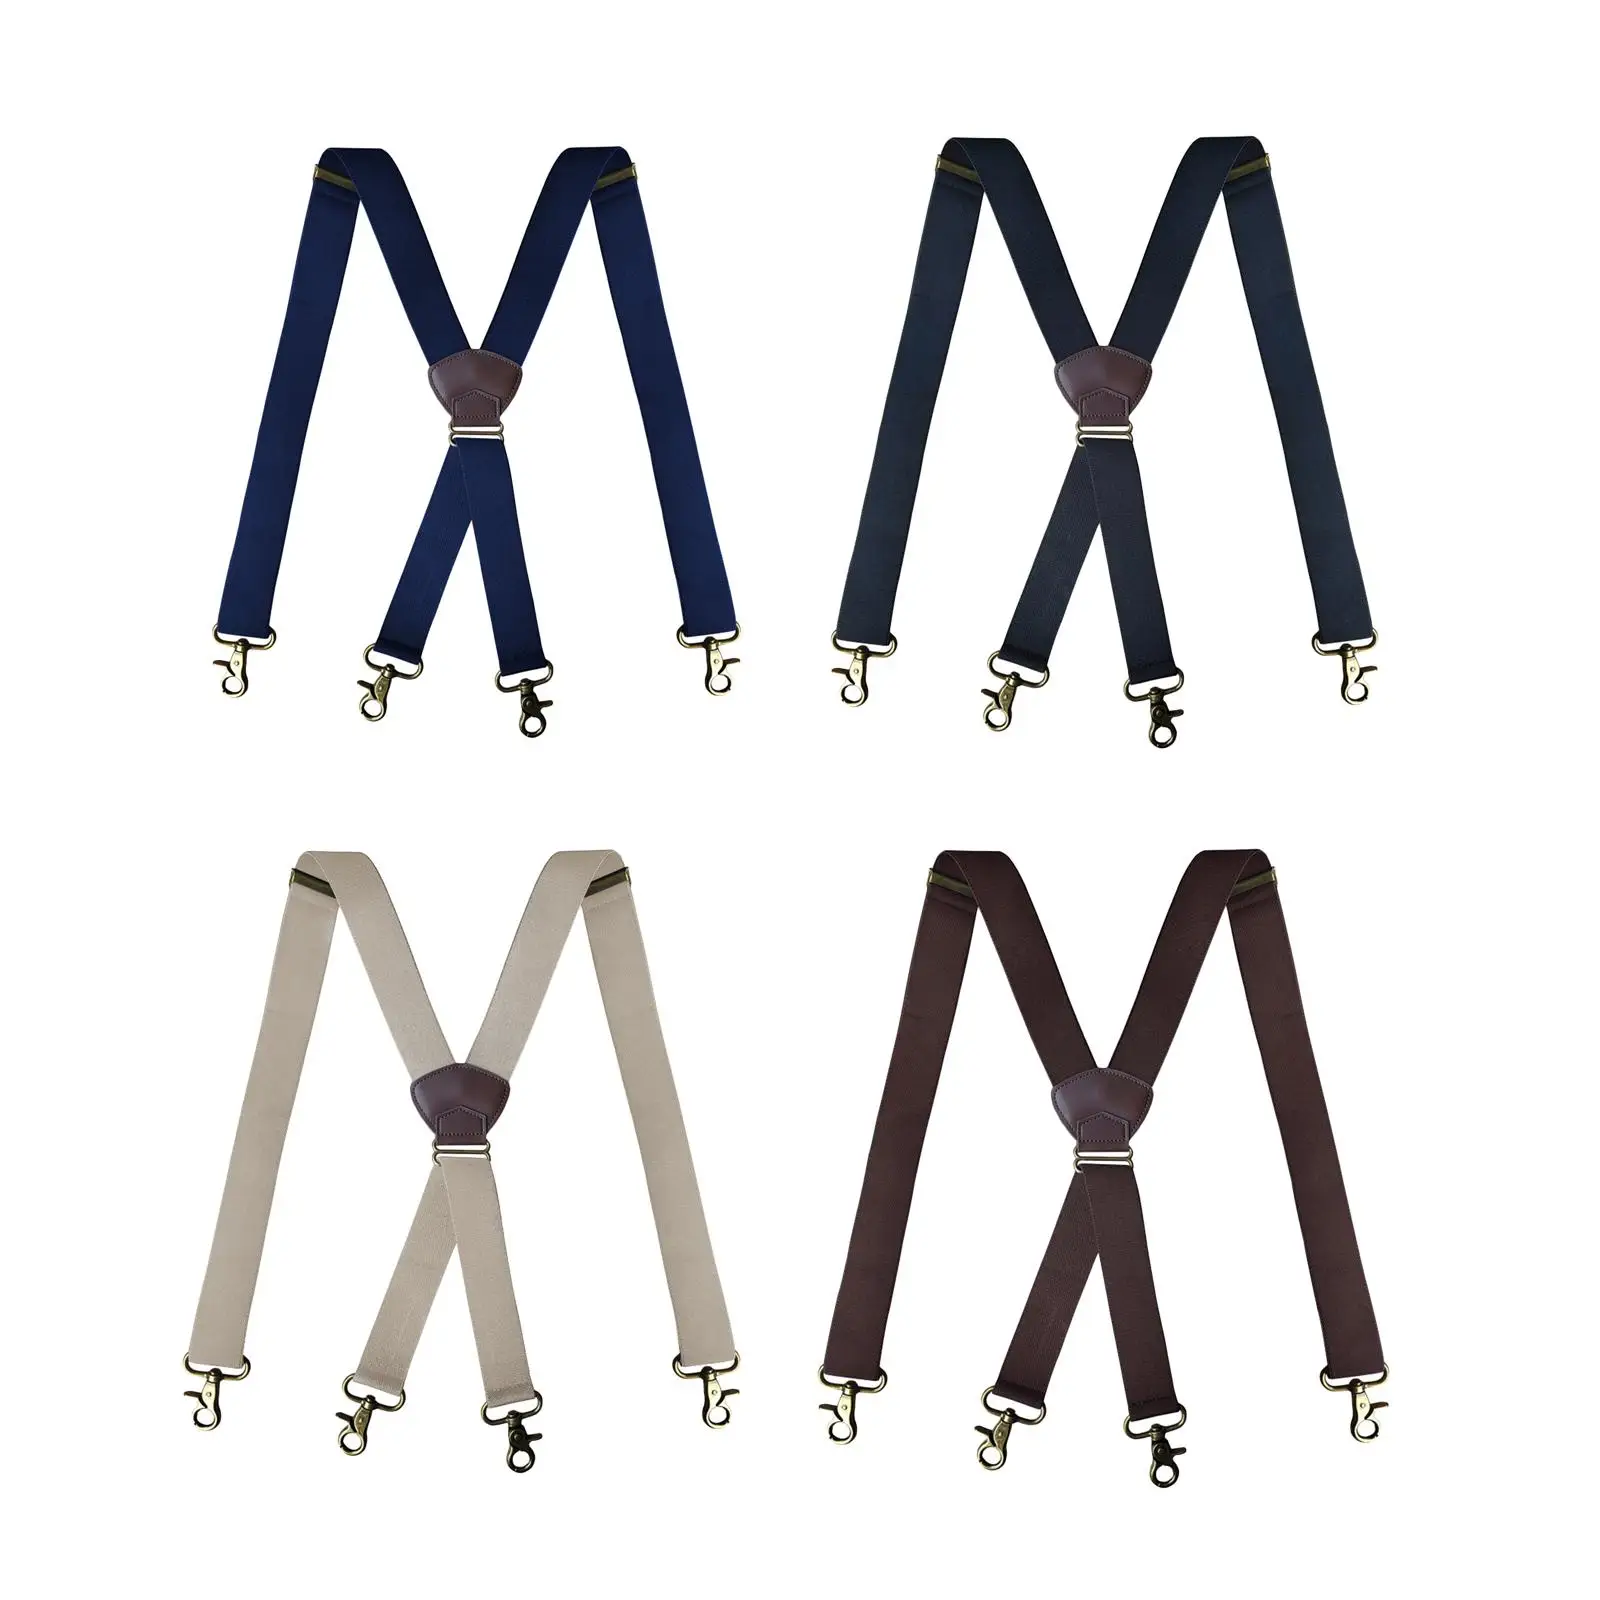 Men Suspenders Portable Fashion with 4 Swivel Hook Clips Trousers Braces for Festivals Party Cocktail Dress suits Holidays